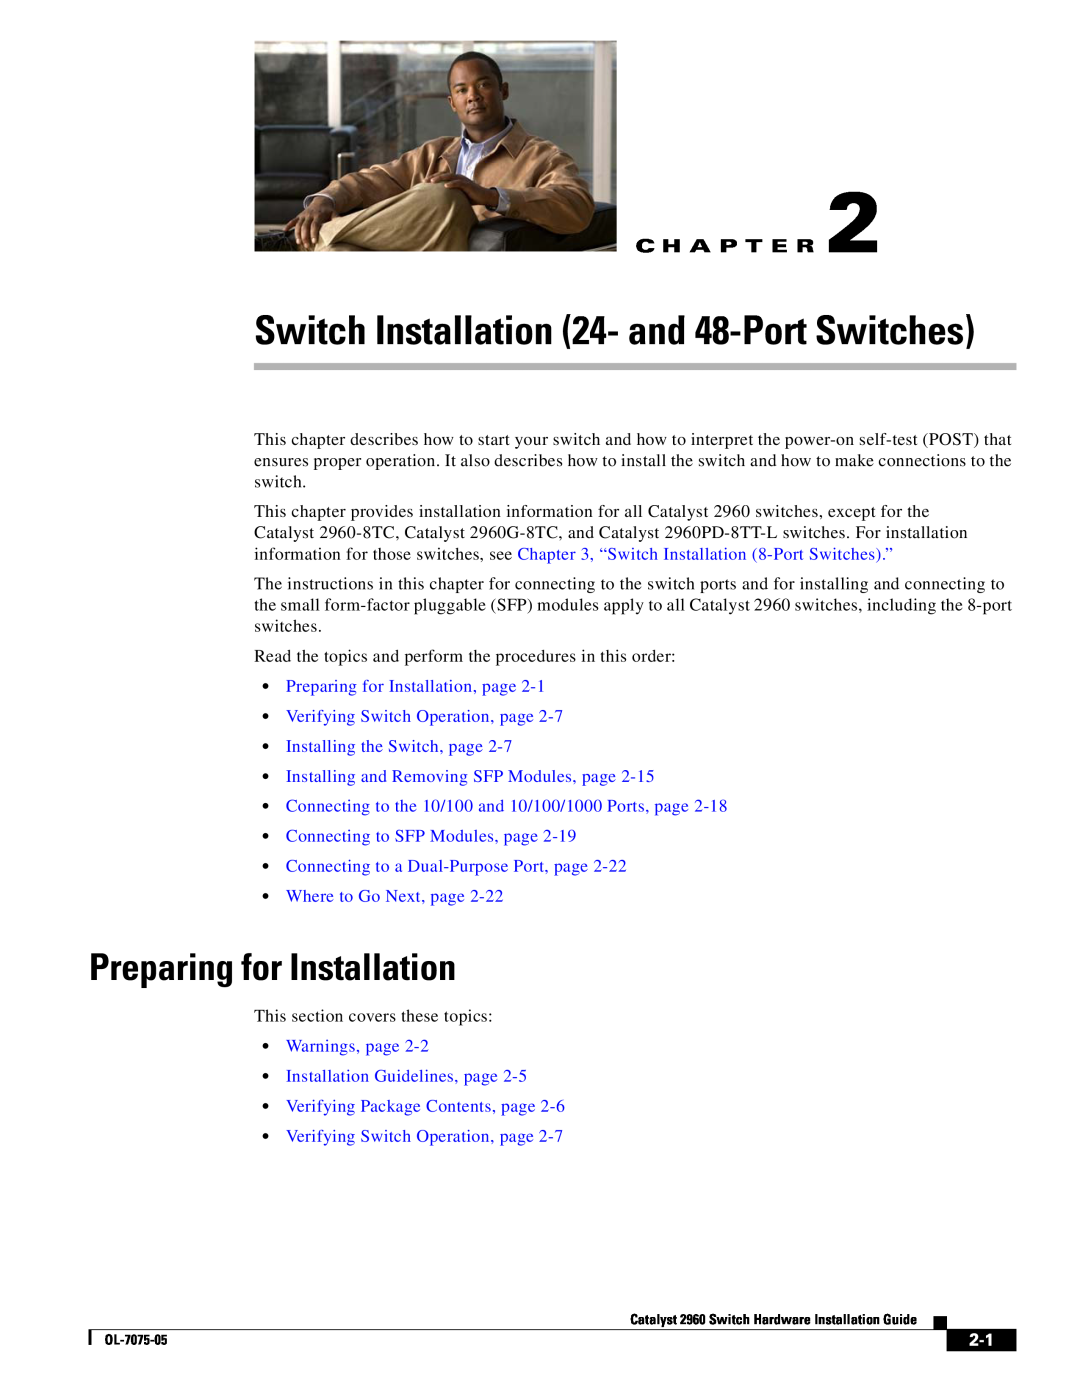 Cisco Systems 2960 specifications Switch Installation 24- and 48-Port Switches, Preparing for Installation, C H A P T E R 